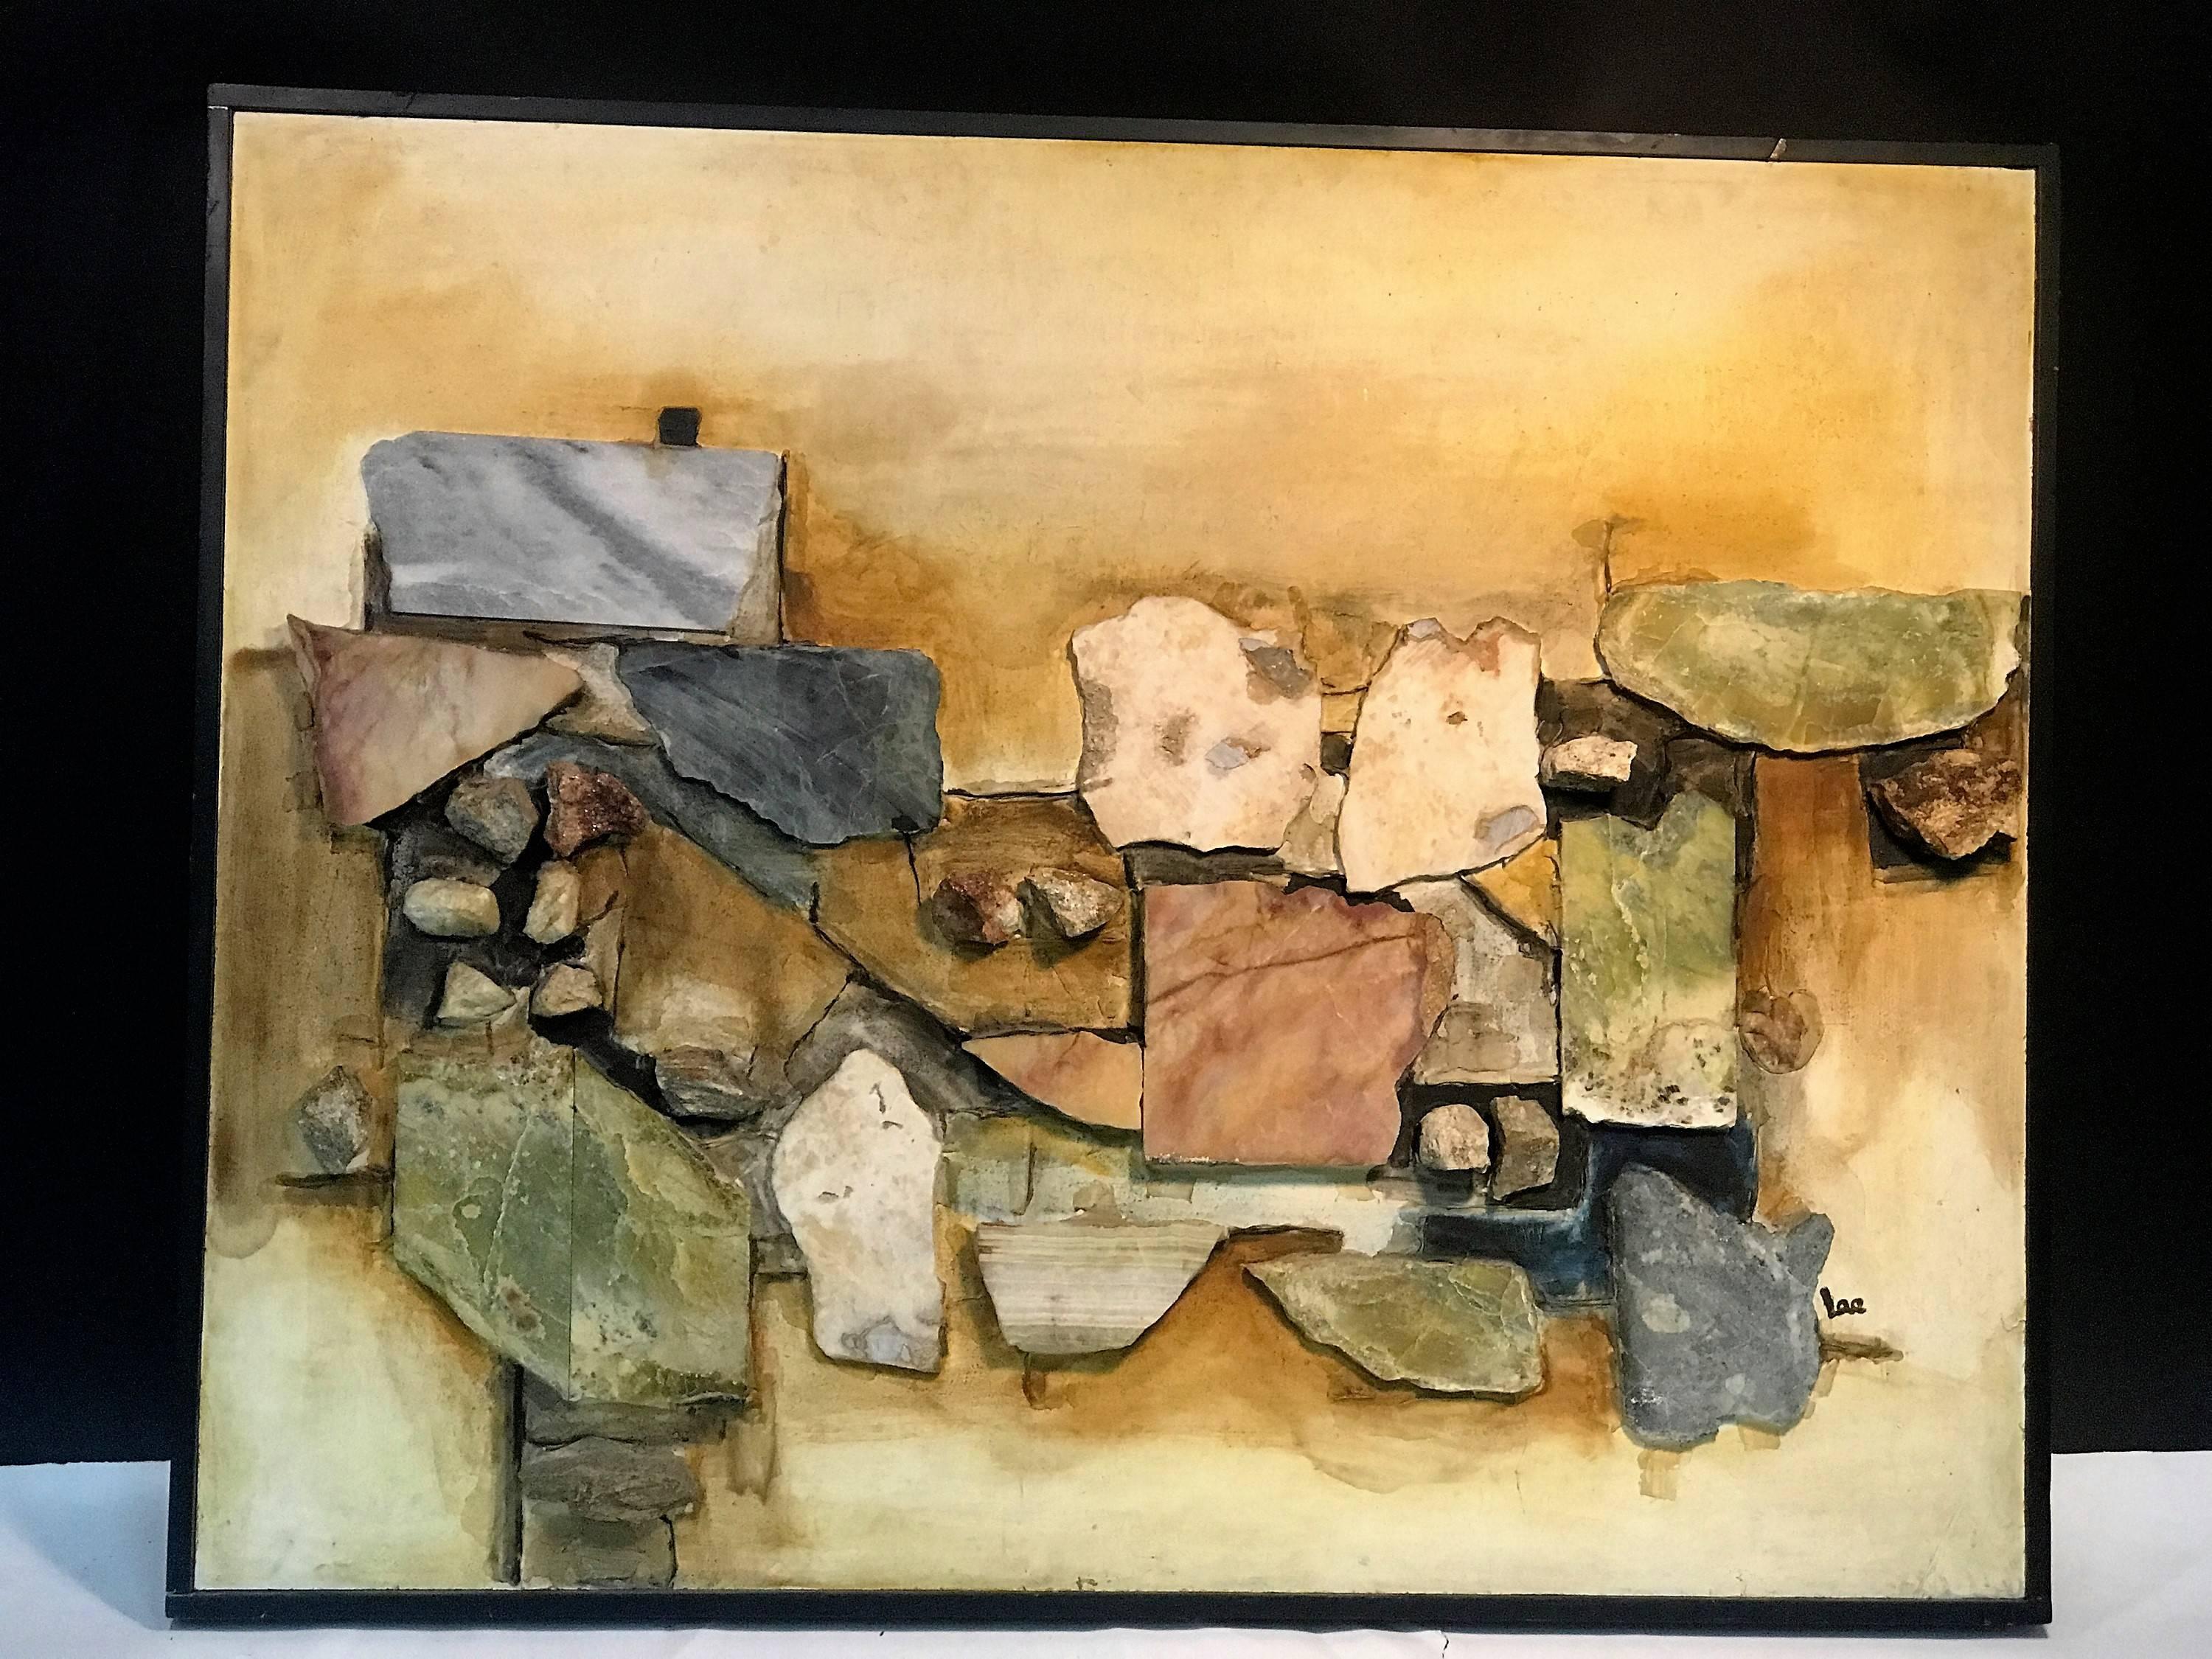 Beautiful, thoughtful and muted colored marble, onyx, slate and other natural stones mounted in a great abstract mural mounted on wood and accented with paint. Framed in a black wood frame and titled 'Afghan Wall' on the back. Signed Lee in the